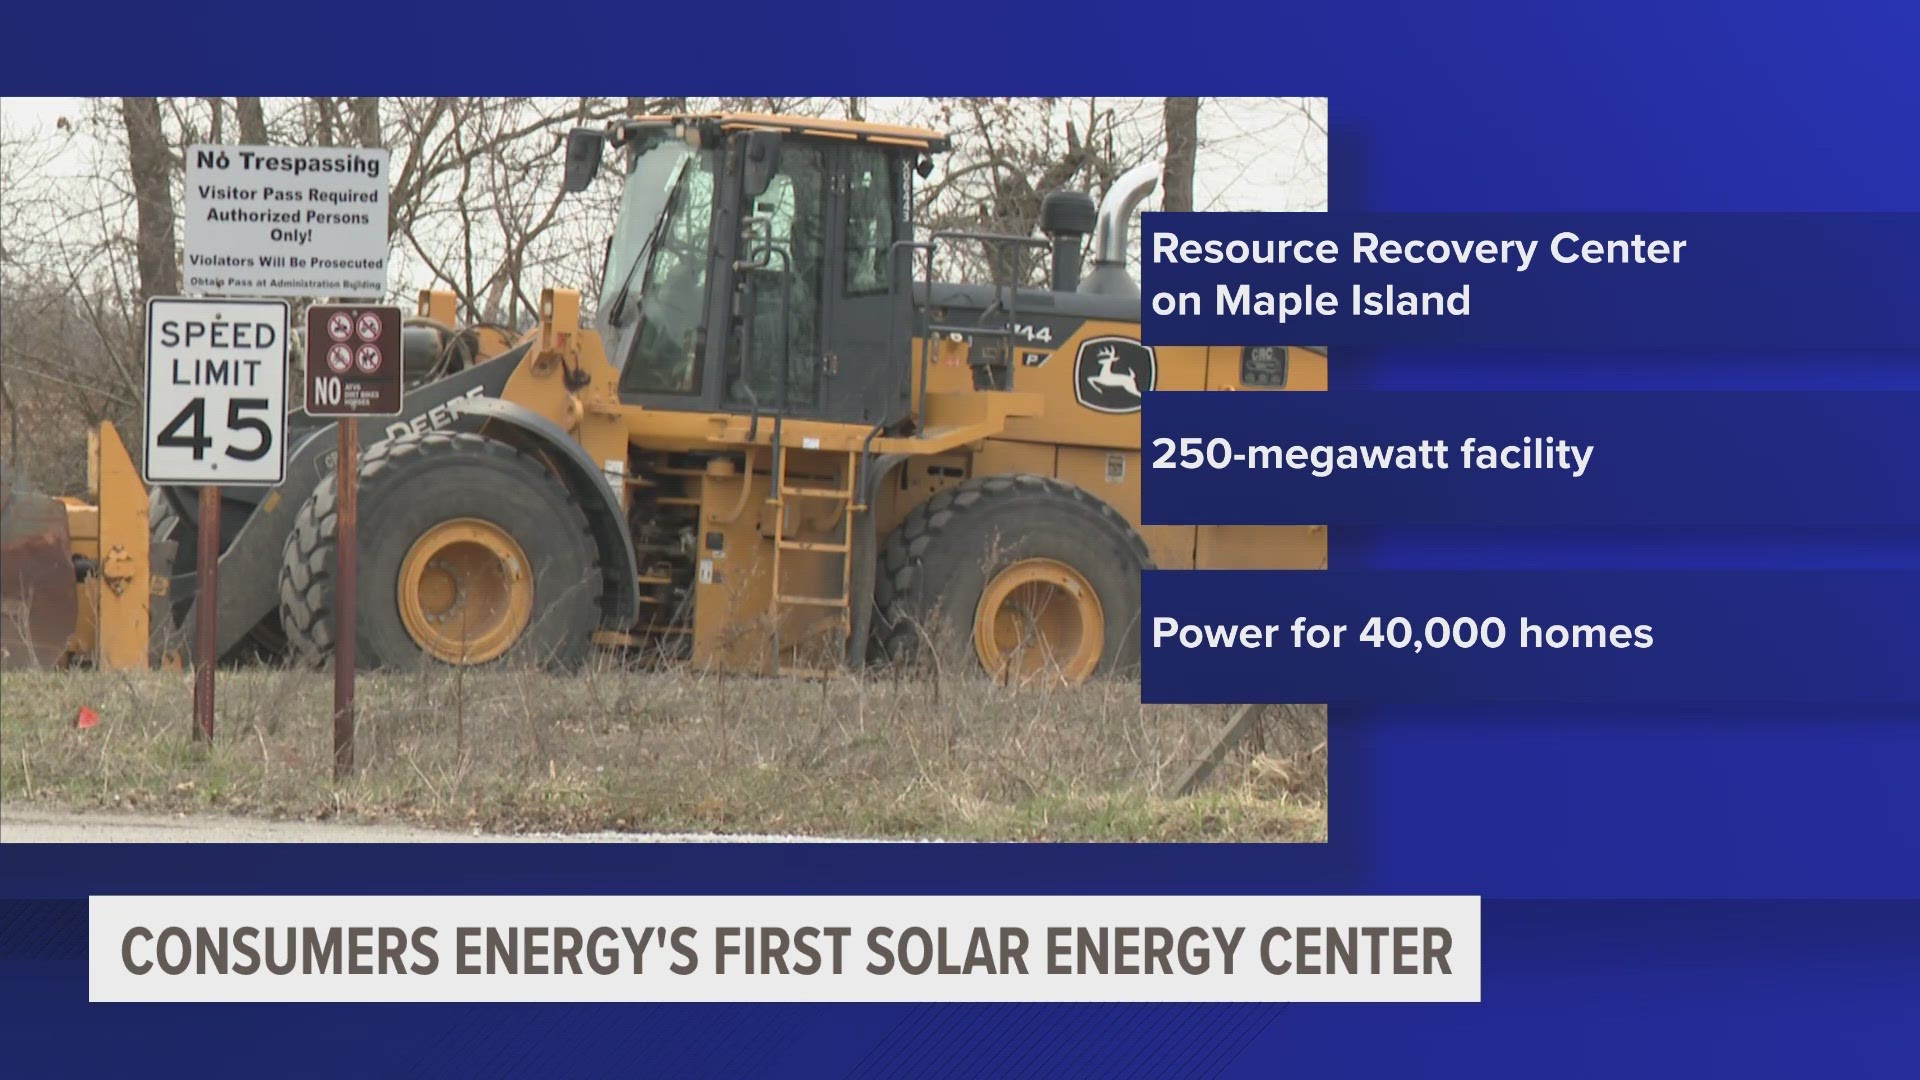 The project is expected to create enough renewable energy to power 40,000 homes.